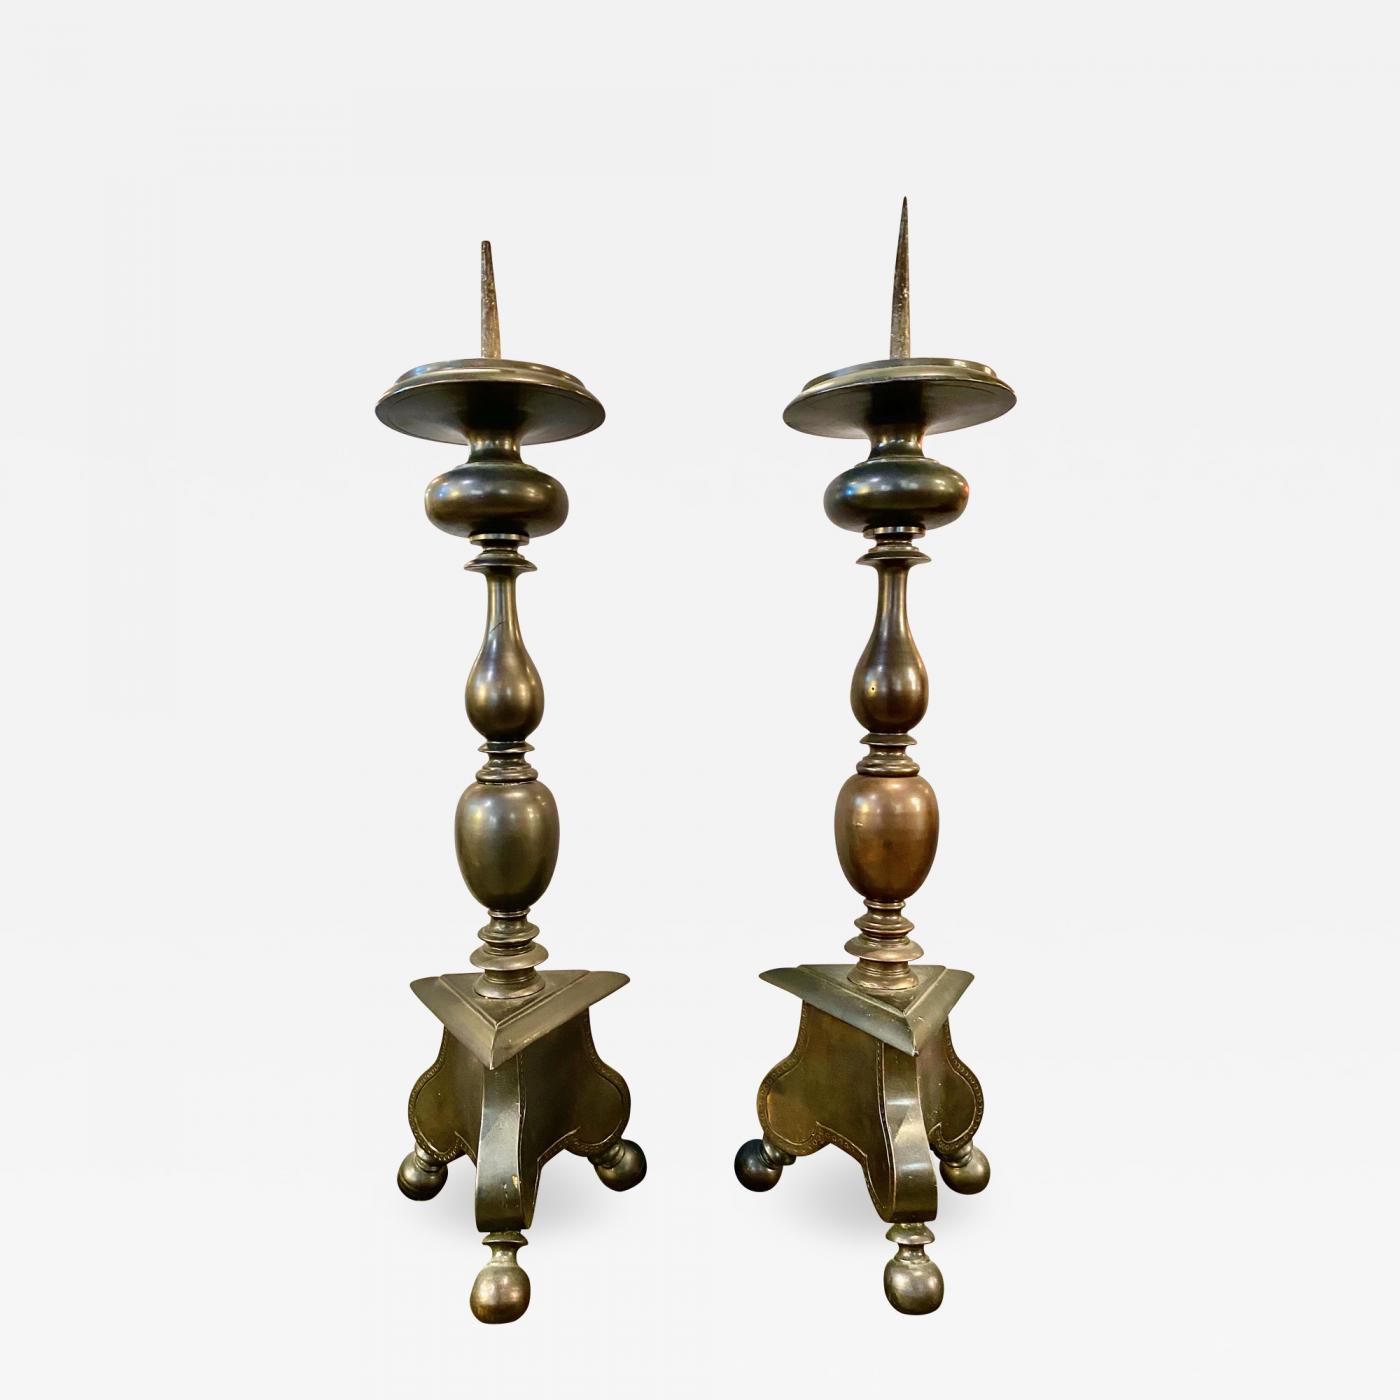 A FINE PAIR OF LATE 16TH CENTURY NUREMBERG BRASS PRICKET CANDLESTICKS. -  SALES ARCHIVE